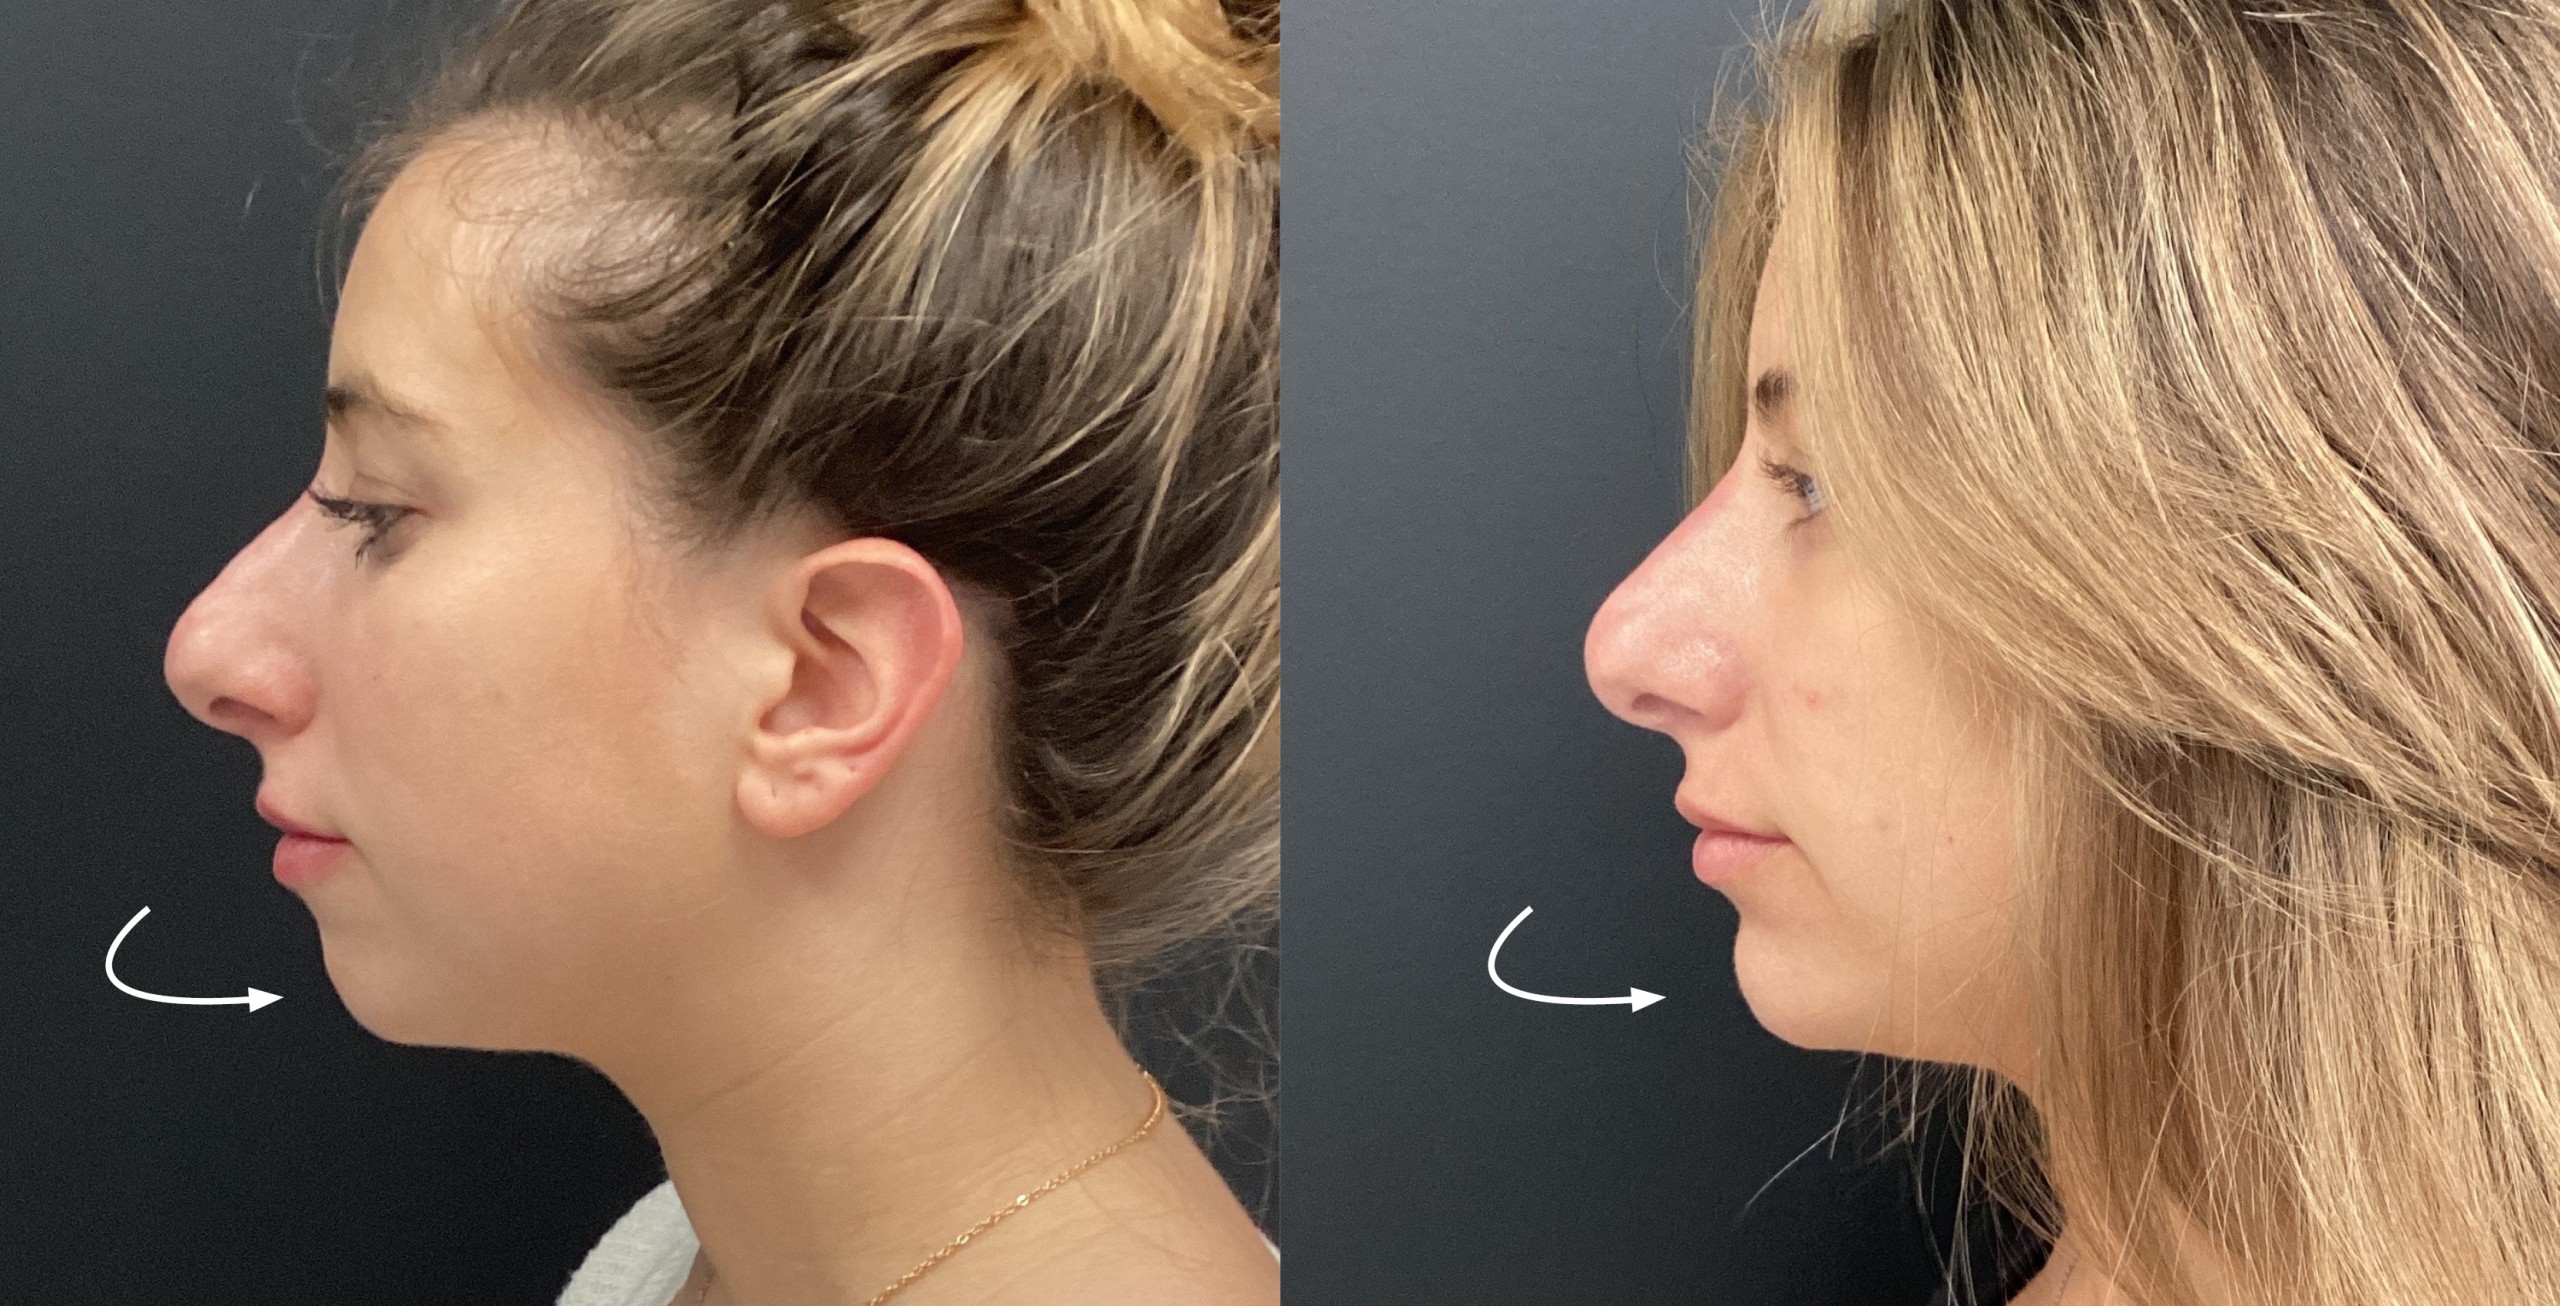 Nose and Chin Filler before and after